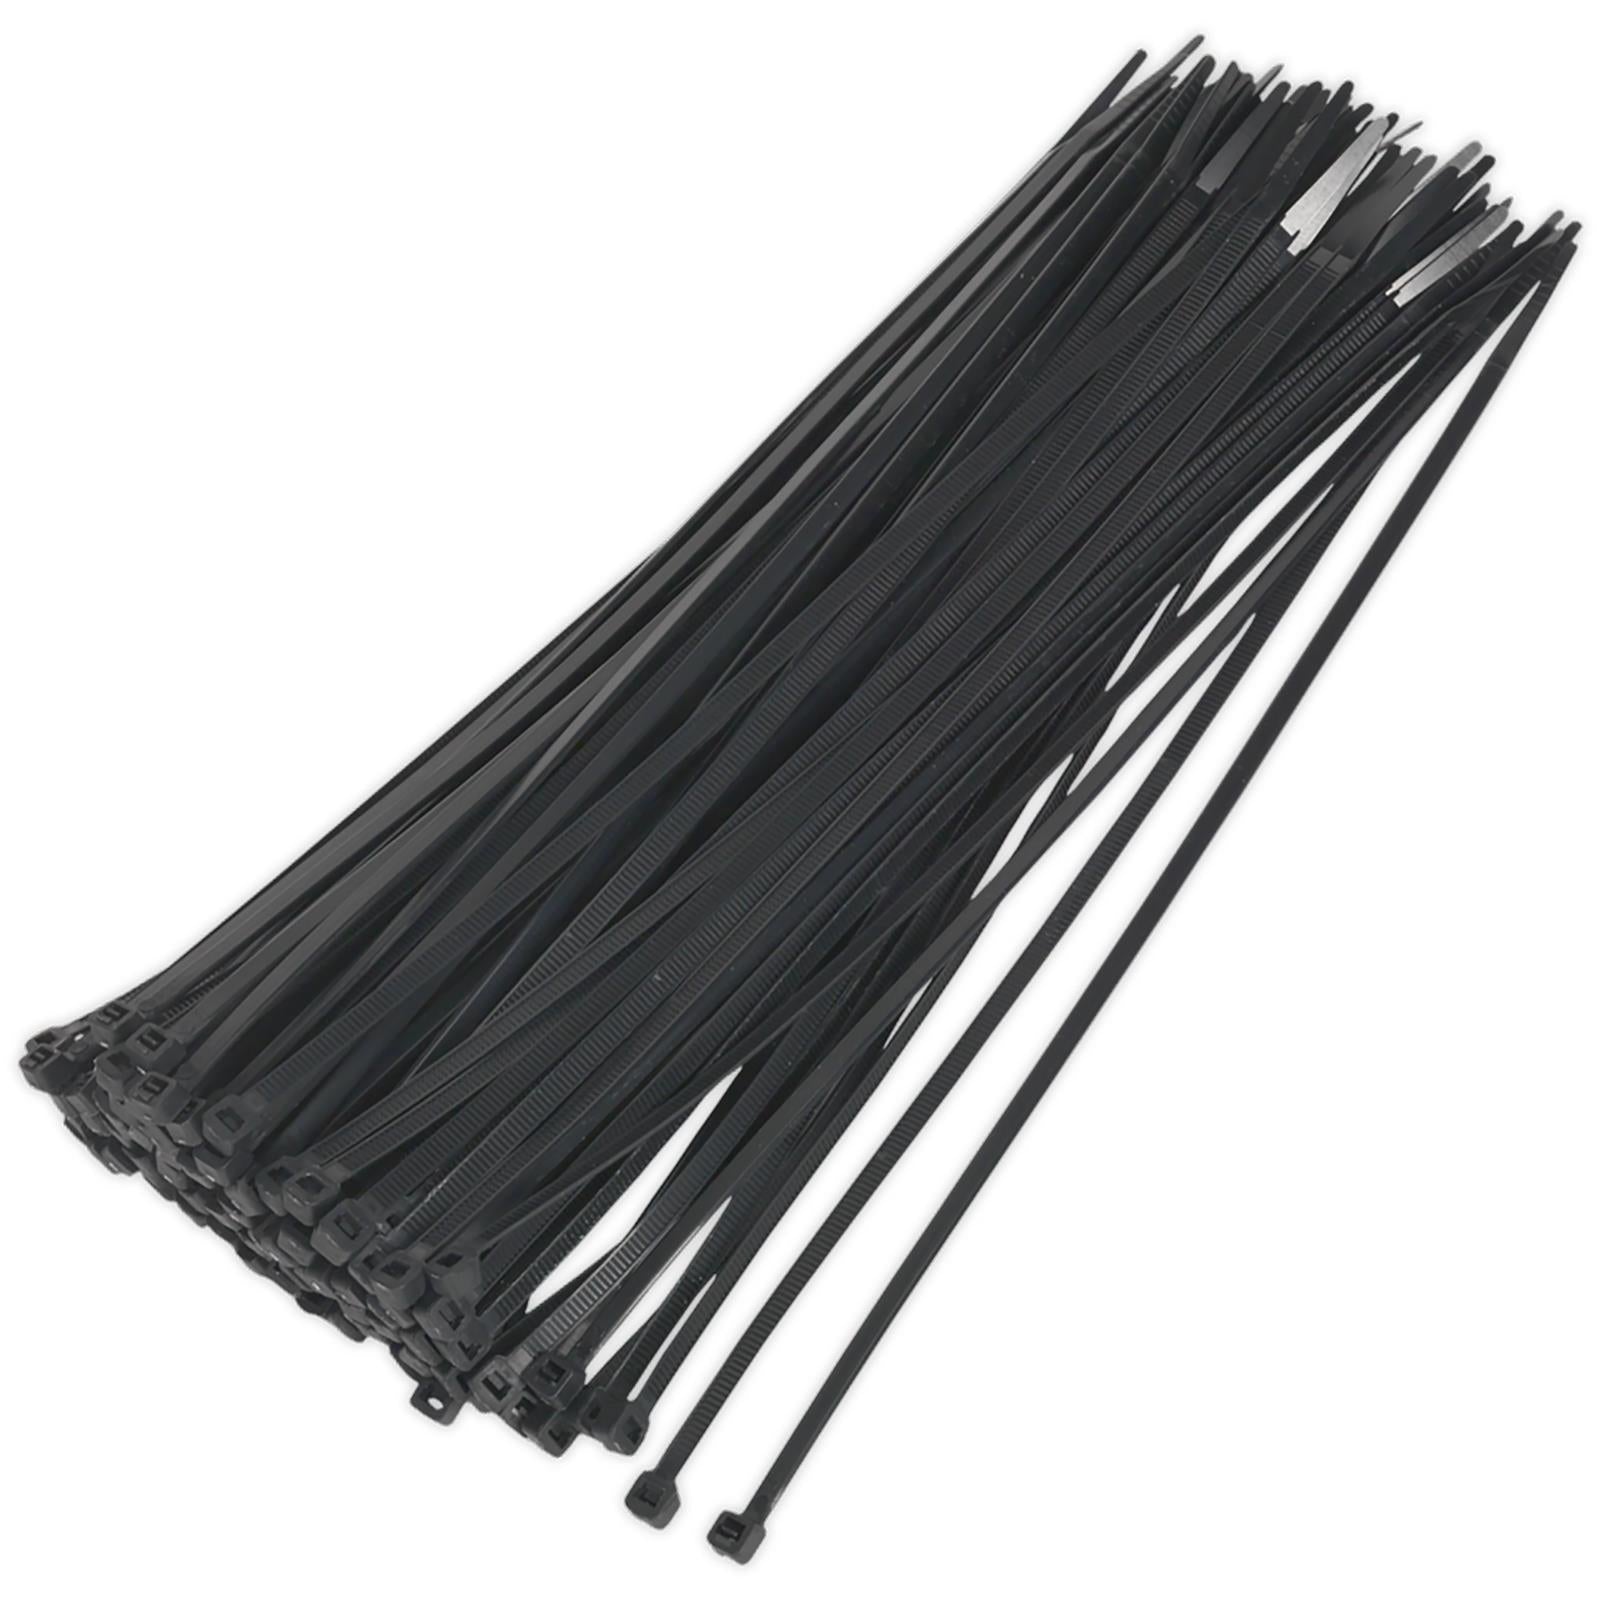 LUPA Cable Ties Nylon 300mm x 4.8mm Black 100 Pack RoHS Compliant